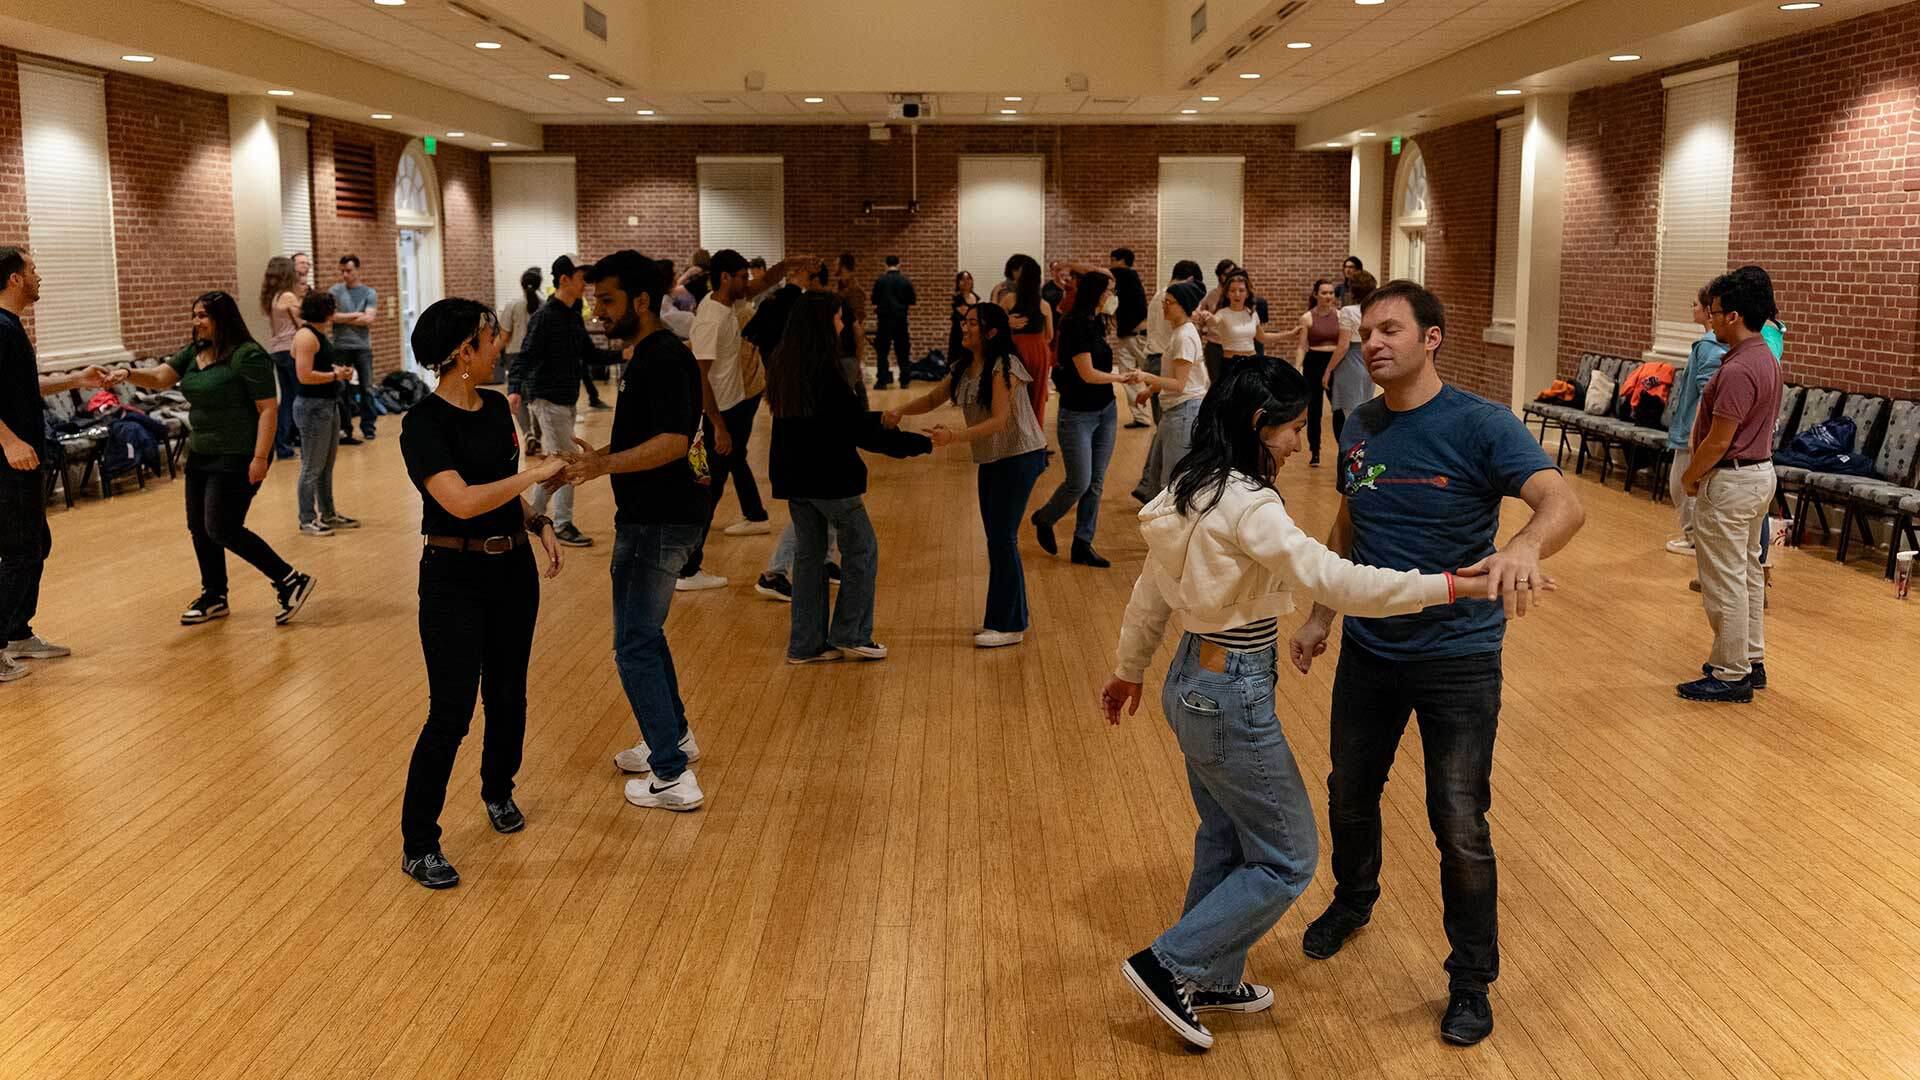 Numerous couples dance in a ball room with a hardwood floor